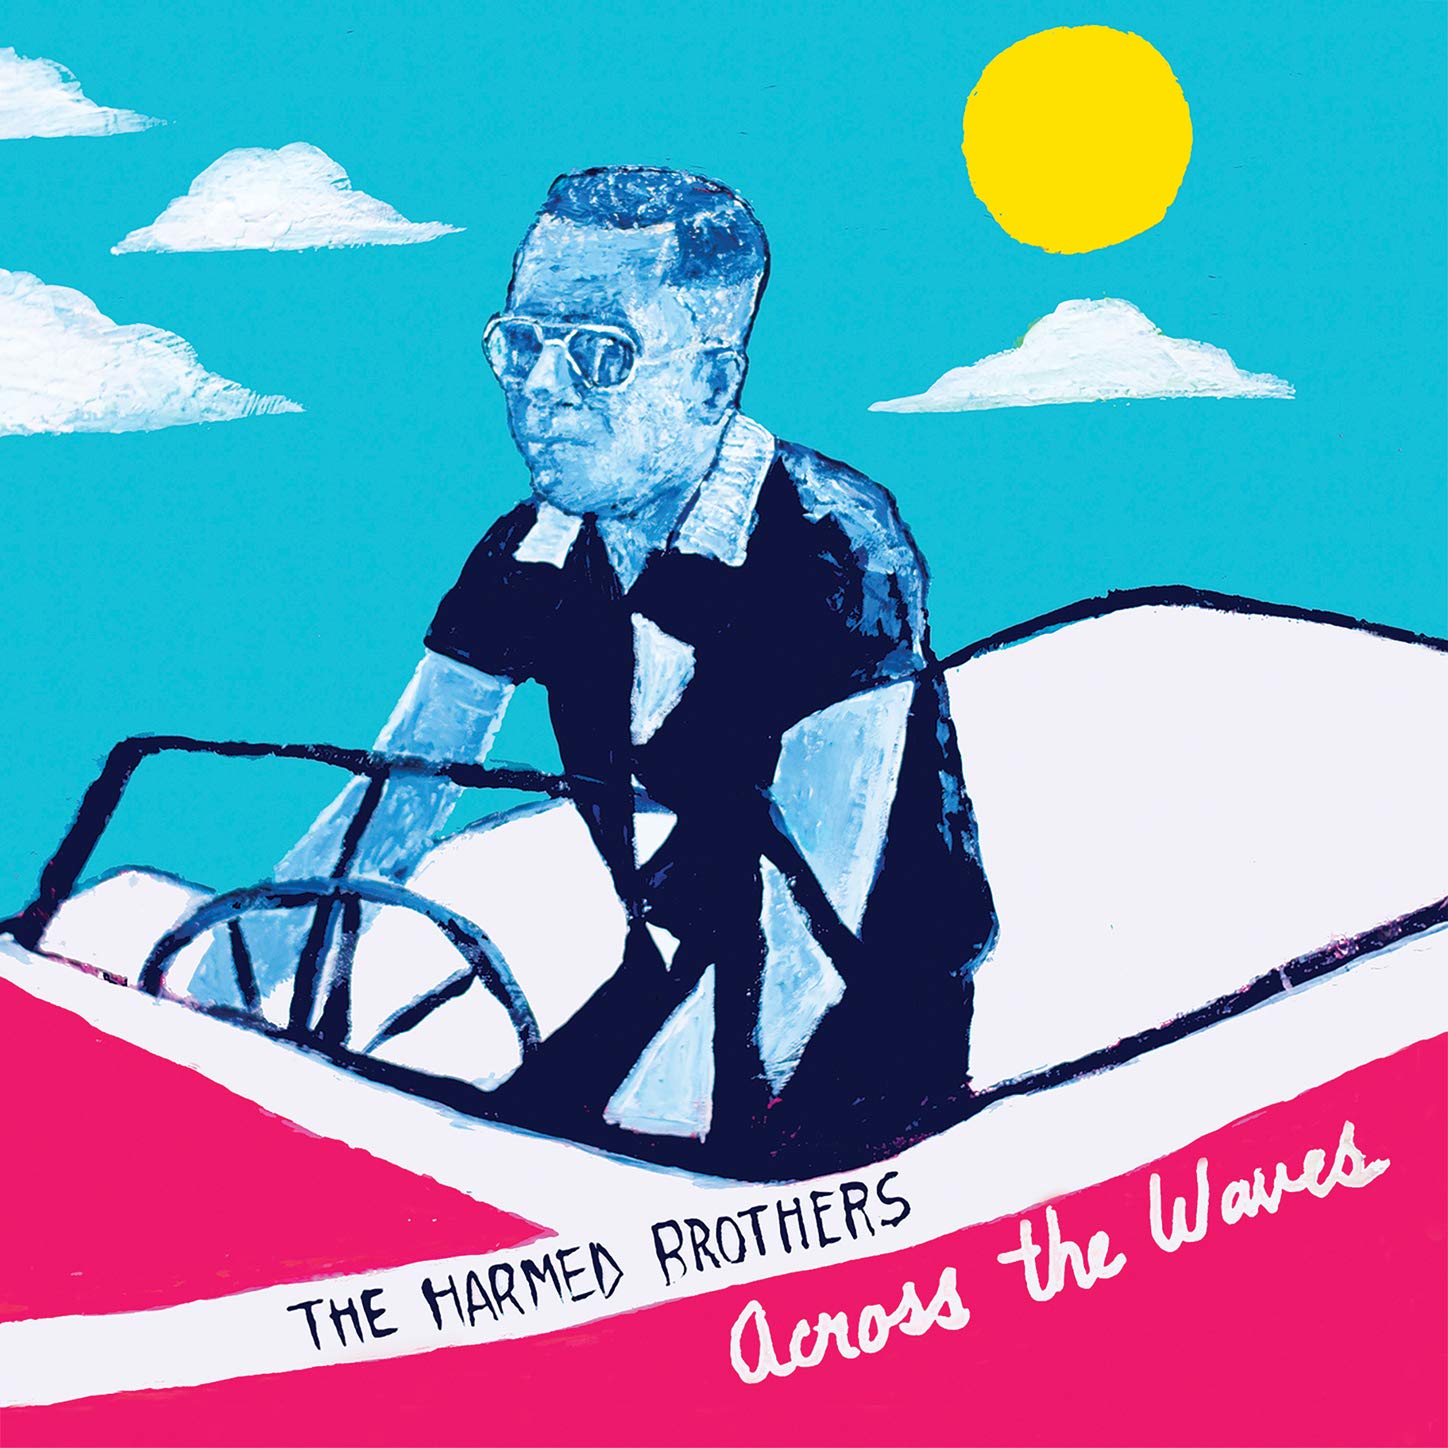 The Harmed Brothers-Across The Waves-(FNG063)-CD-FLAC-2020-WRE Download